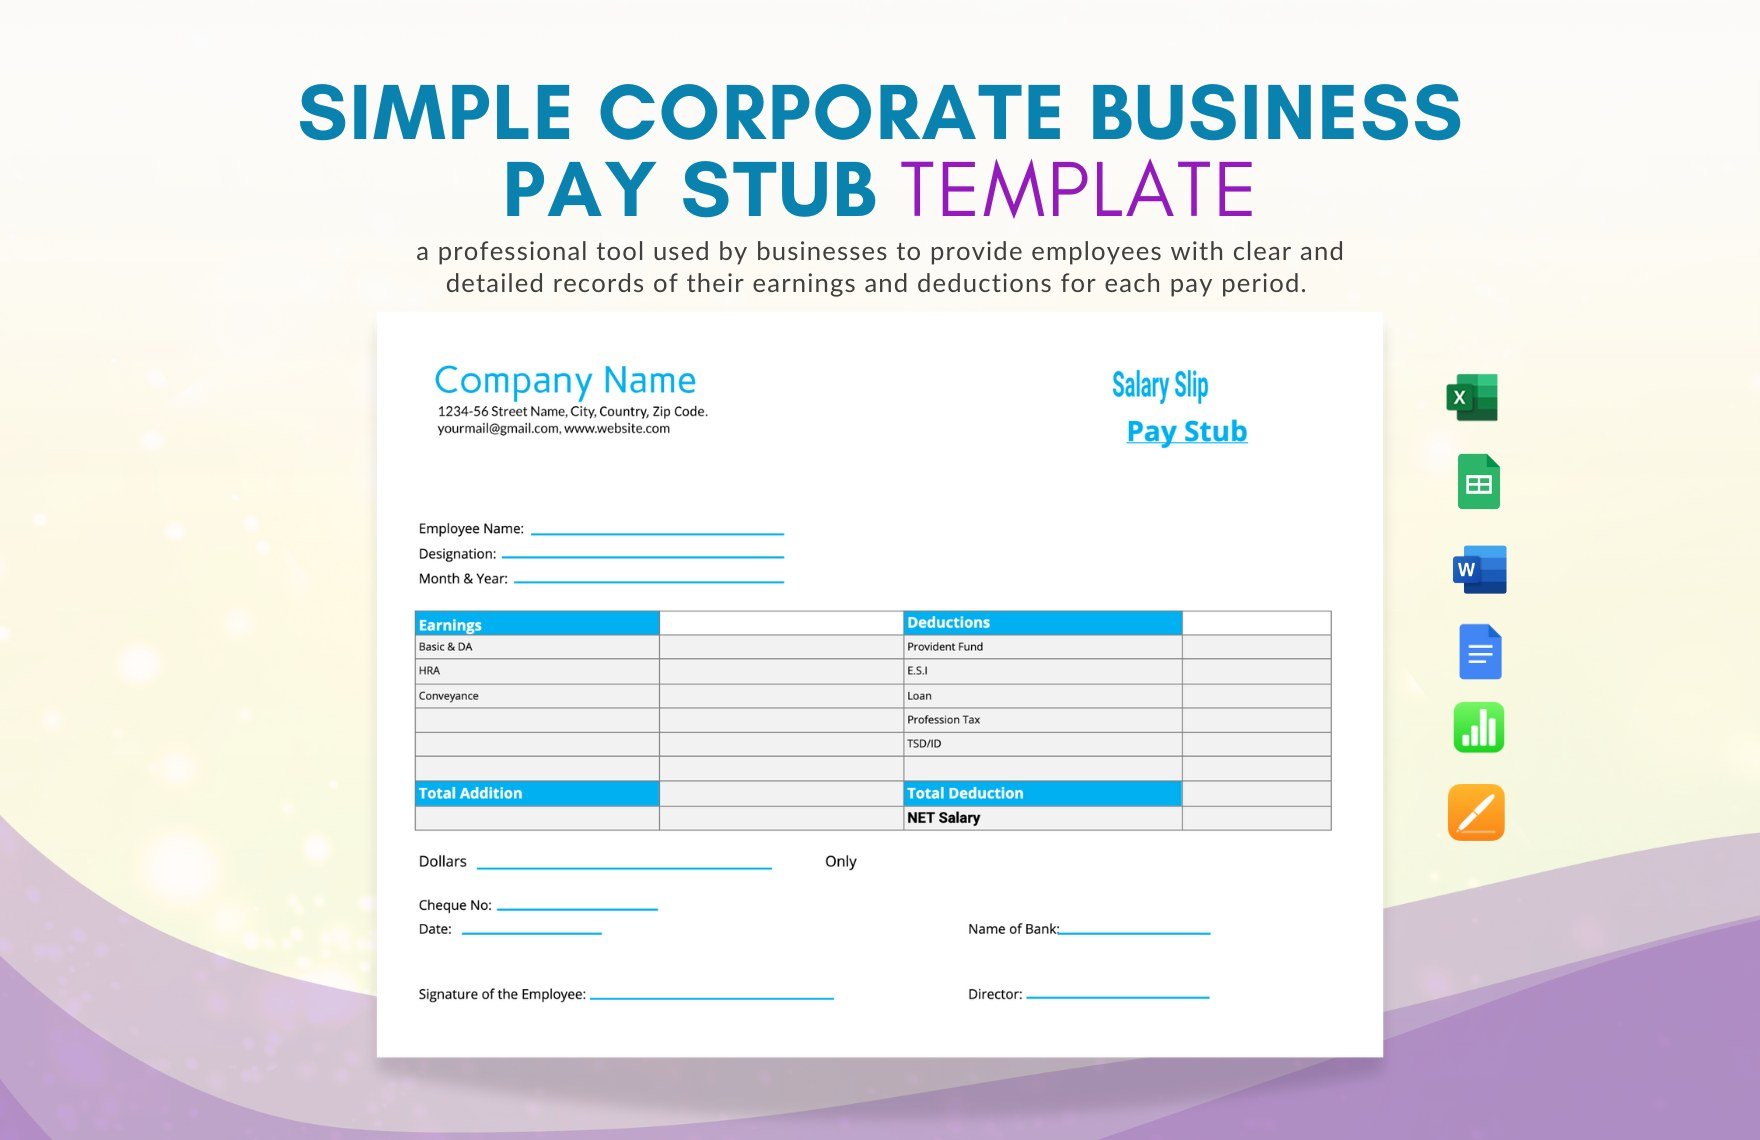 Simple Corporate Business Pay Stub Template in Word, Google Docs, PDF, Google Sheets